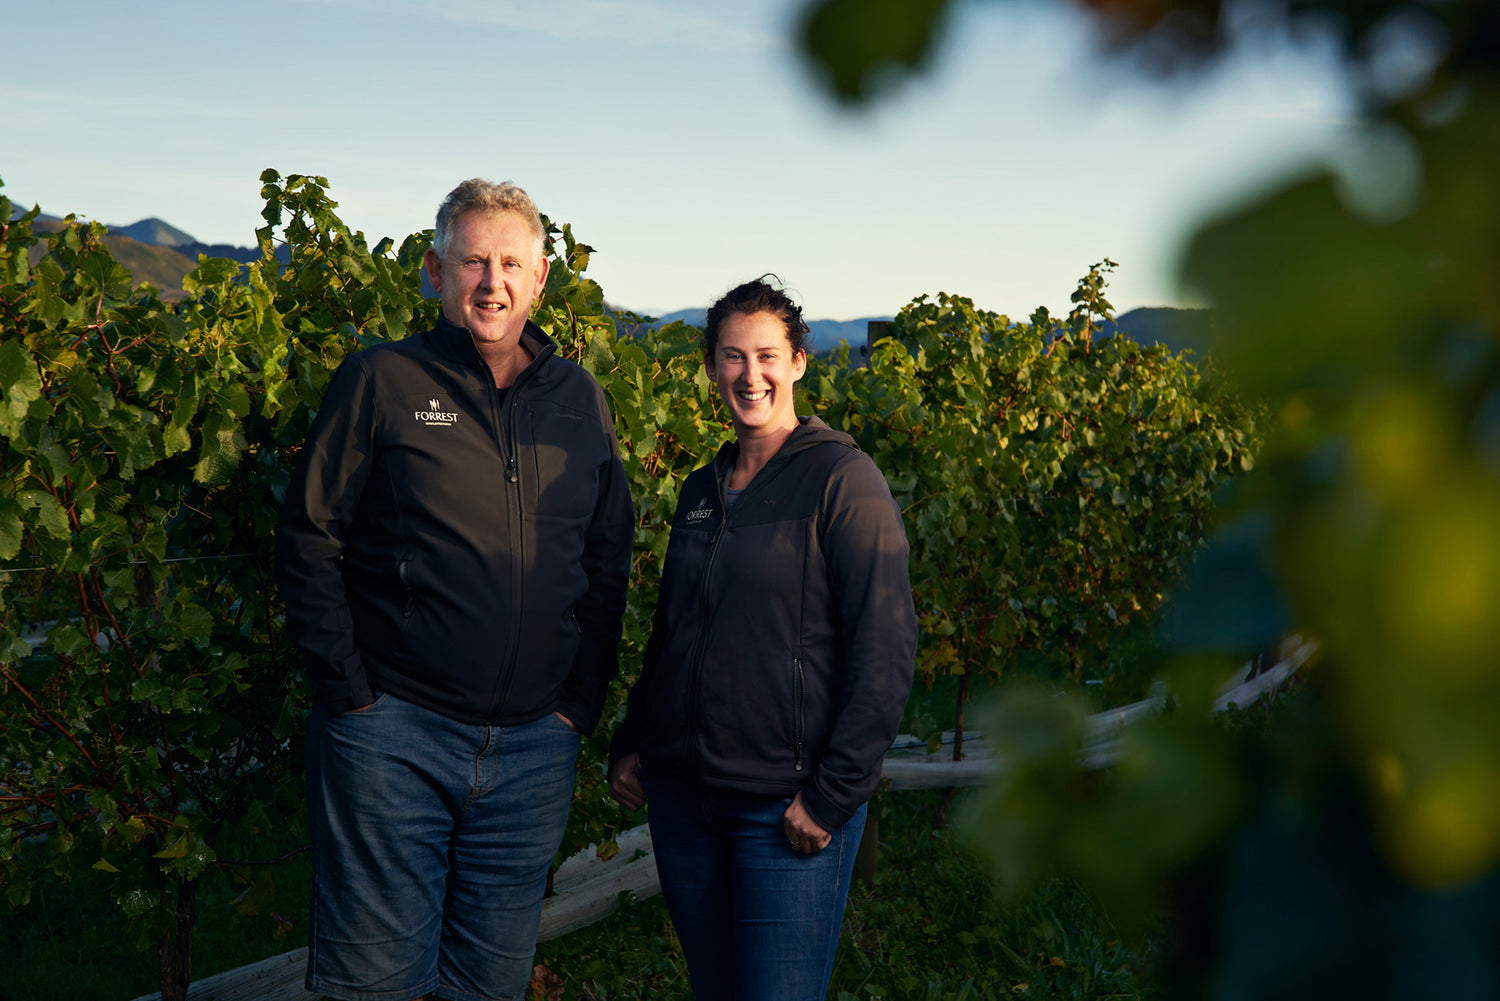 The Doctors' wines John and daughter Beth Forrest in their vineyard